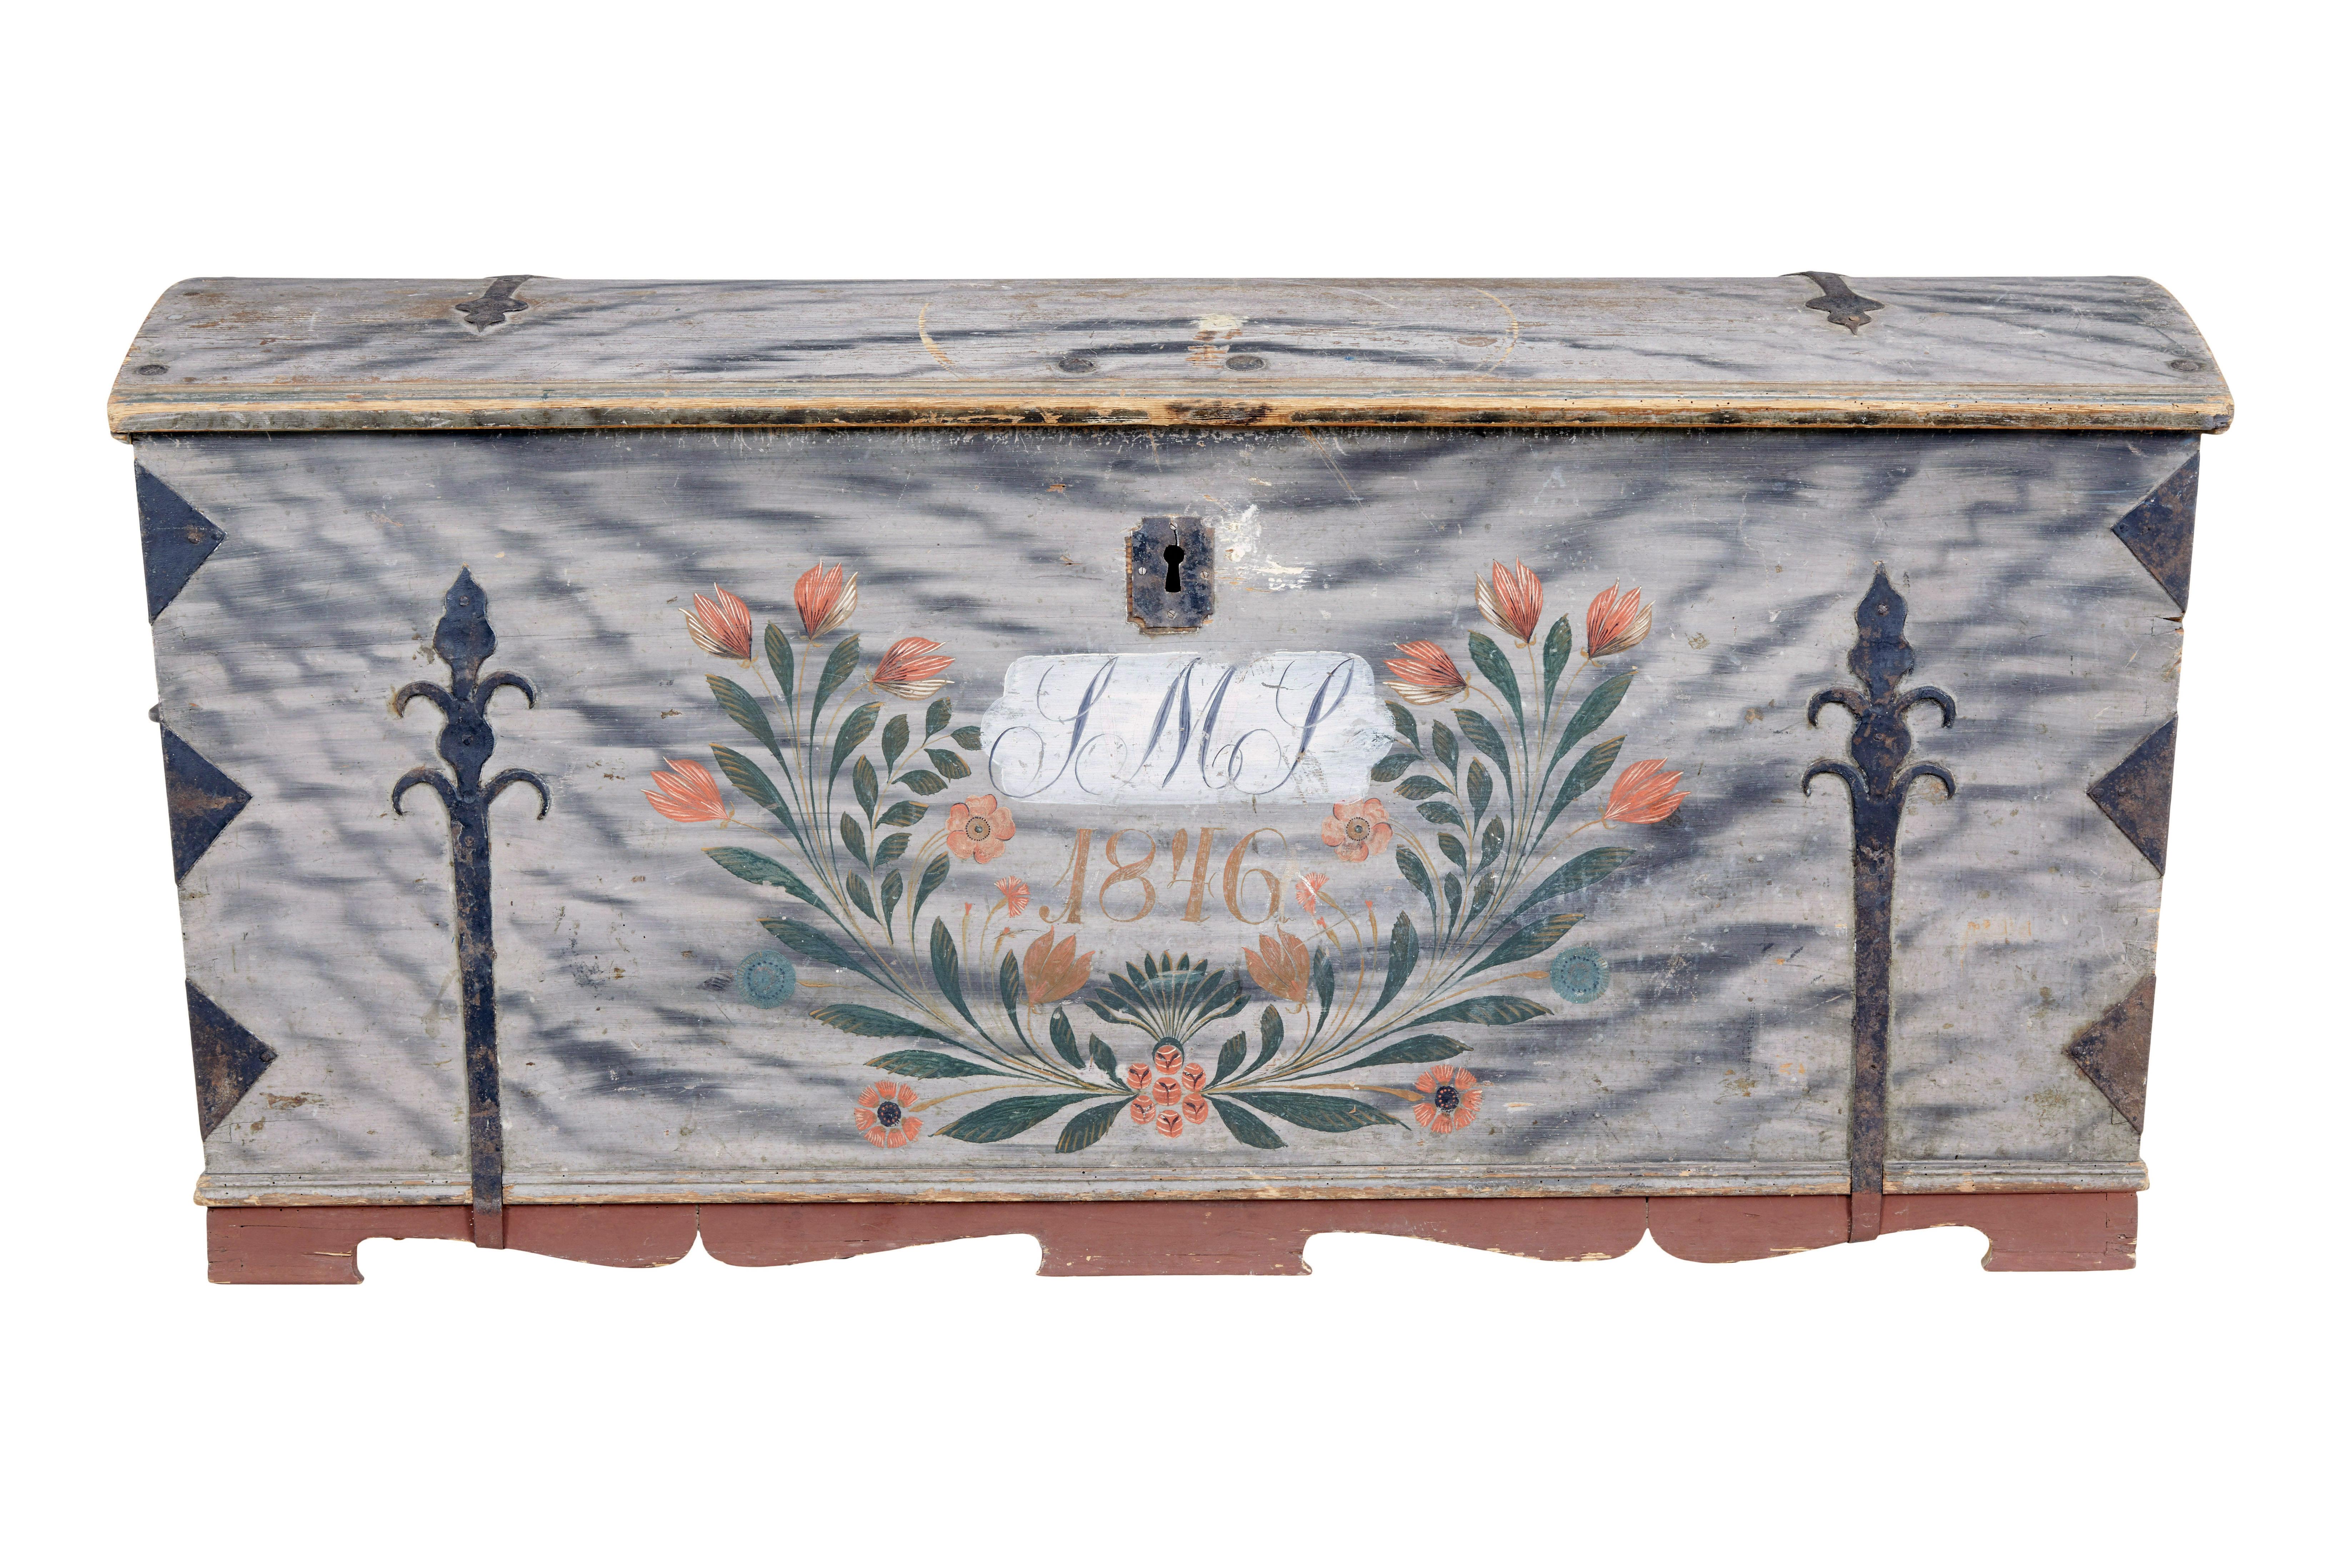 Swedish mid 19th century hand painted dome top chest circa 1846.

Beautiful dome top chest, which was clearly cherished by the level of decoration.  Initialled on the front and dated 1846, surrounded by hand painted florals.  Interior with original